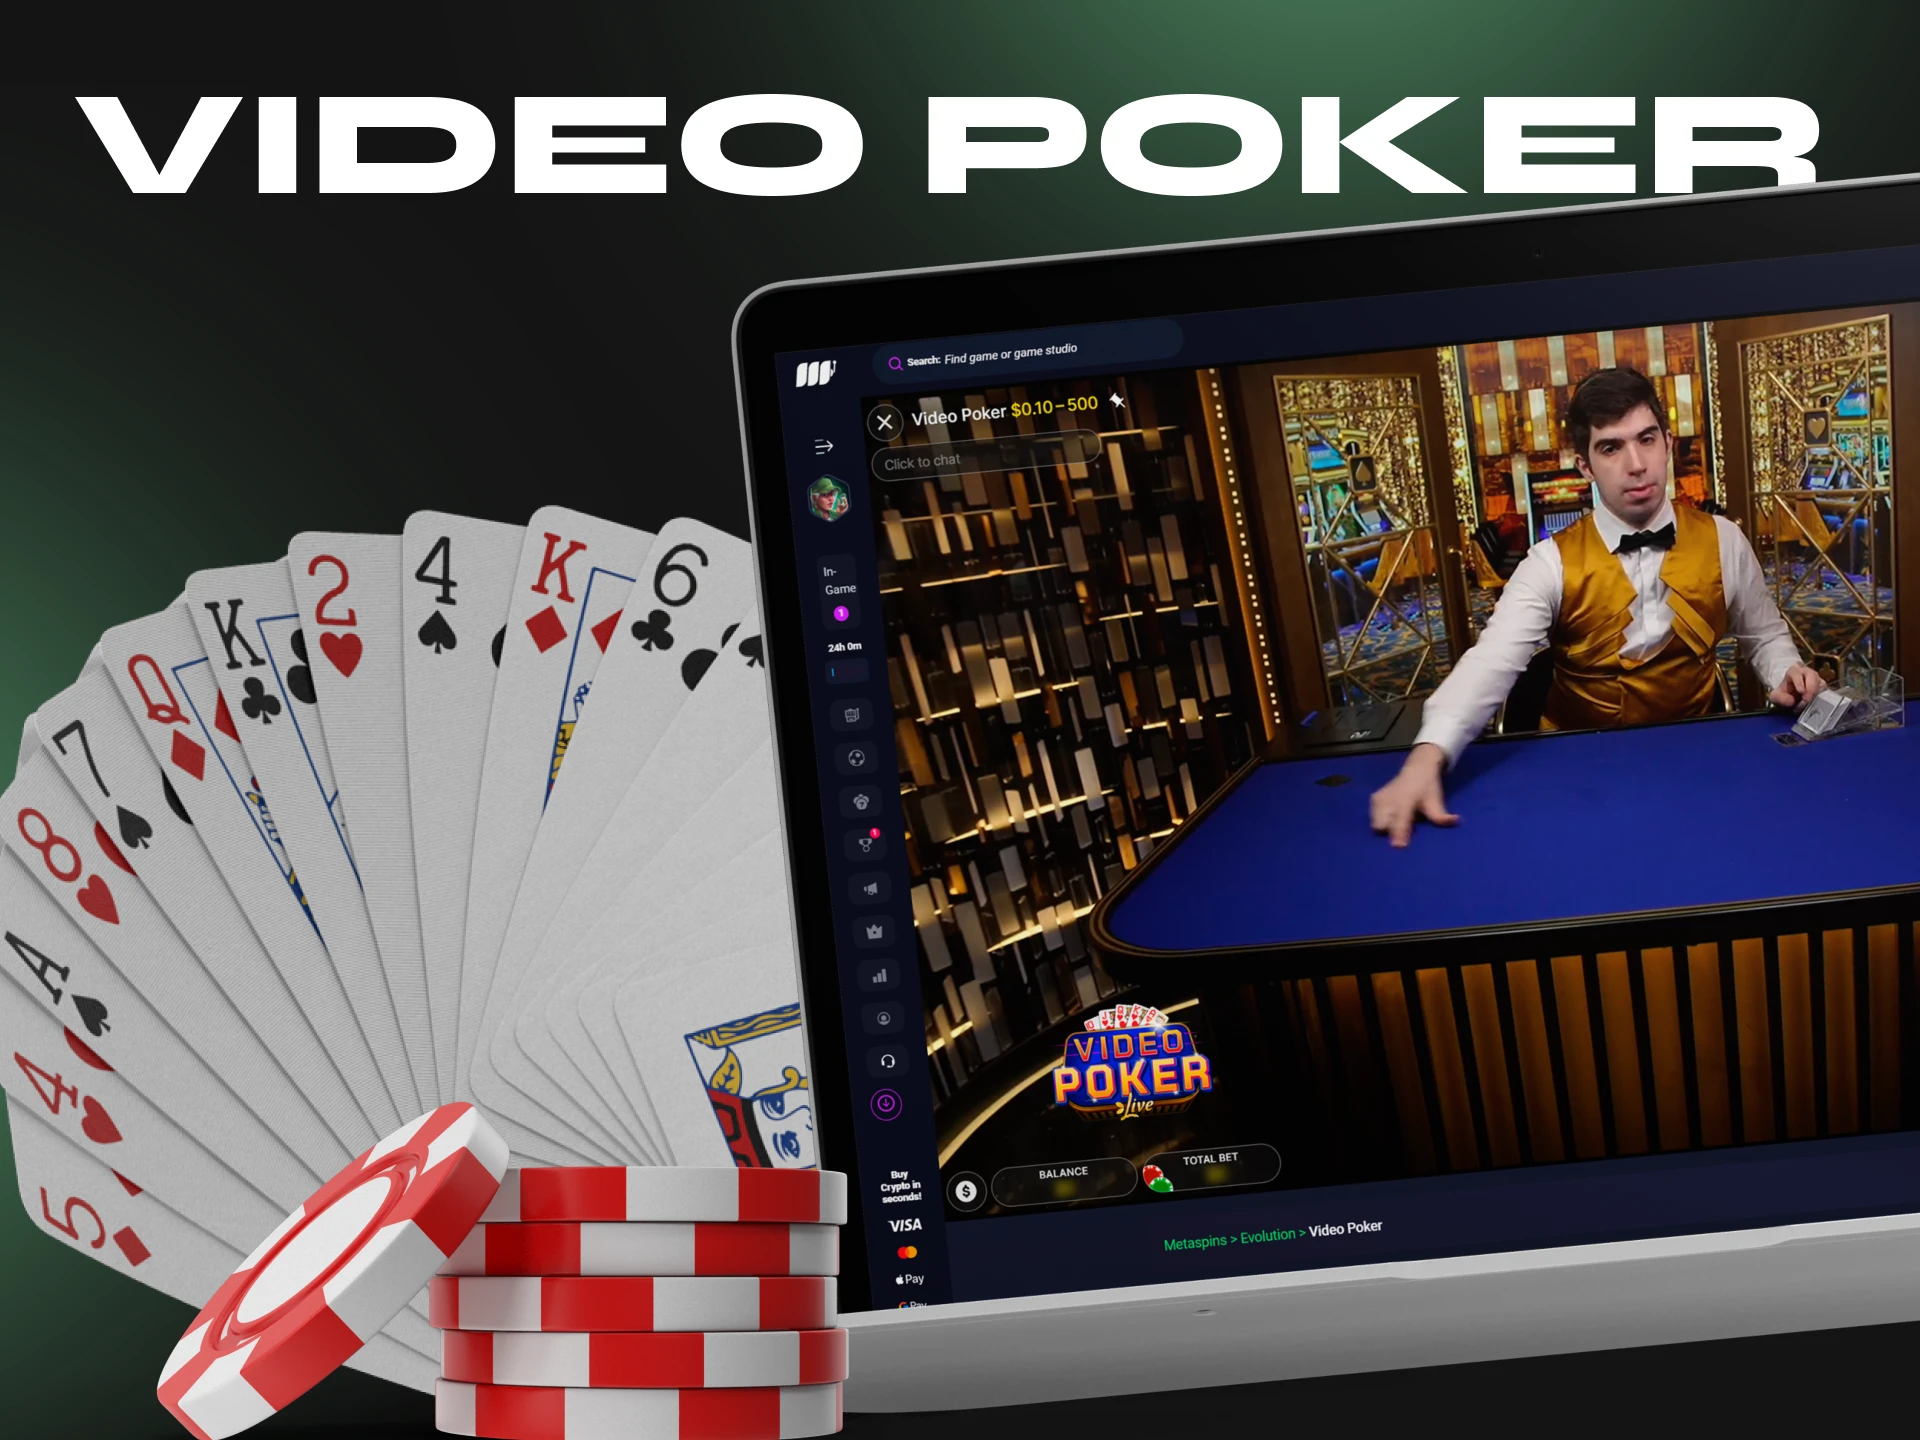 You can play video poker in crypto casinos.